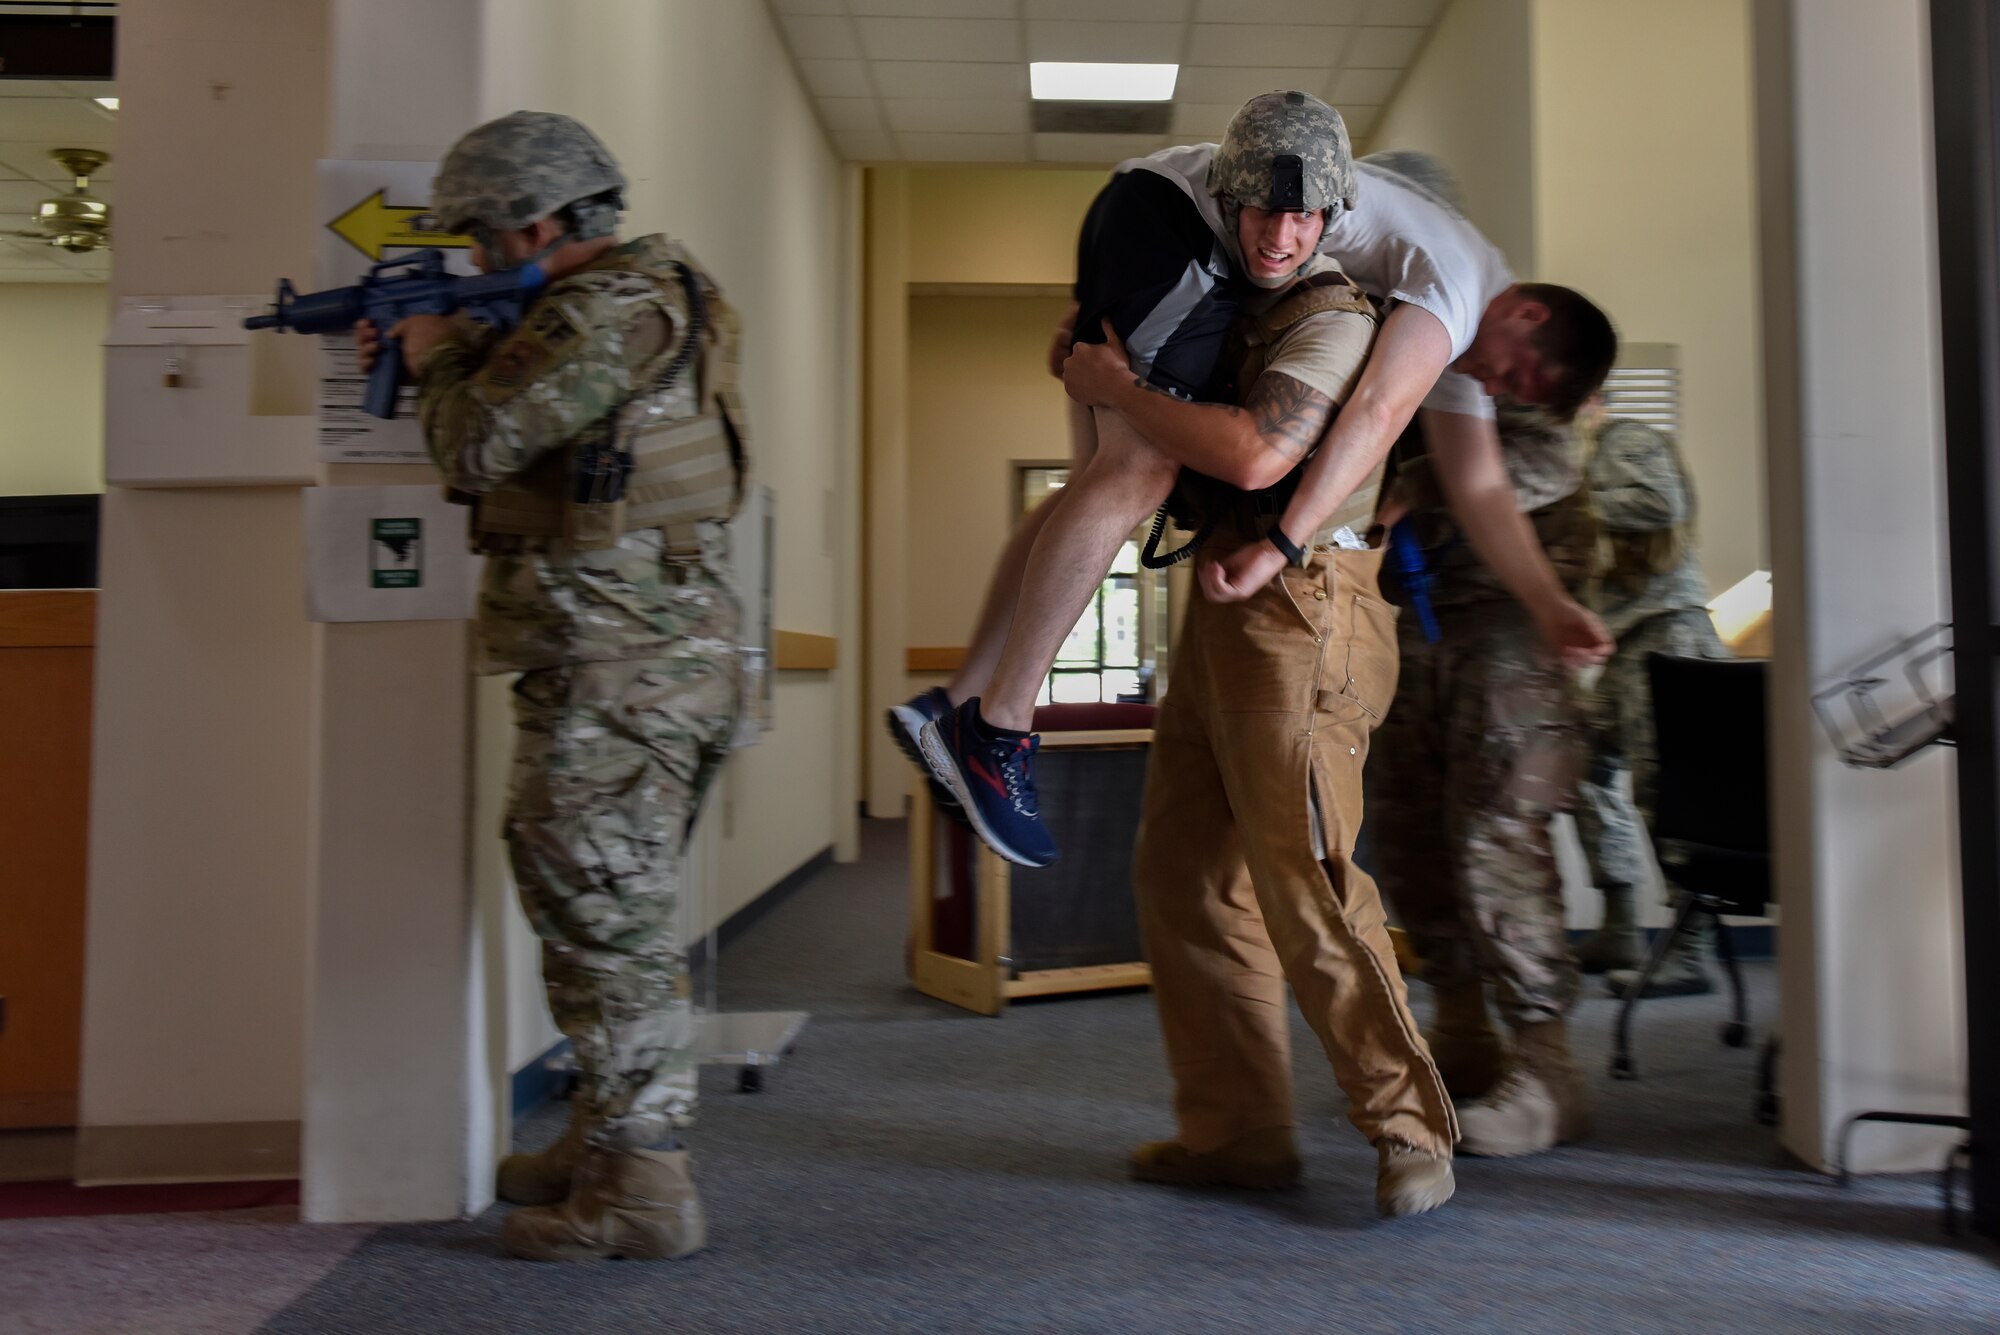 Staff Sgt. Dakota Farrow, 47th Security Forces Squadron military working dog handler, evacuates a simulated active shooter victim during a training exercise at Laughlin Air Force Base, Texas, July 22, 2019. The exercise, aimed at bolstering crisis readiness and response capabilities, simulated a hostage situation that lasted for nearly two hours. (U.S. Air Force photo by Staff Sgt. Benjamin N. Valmoja)